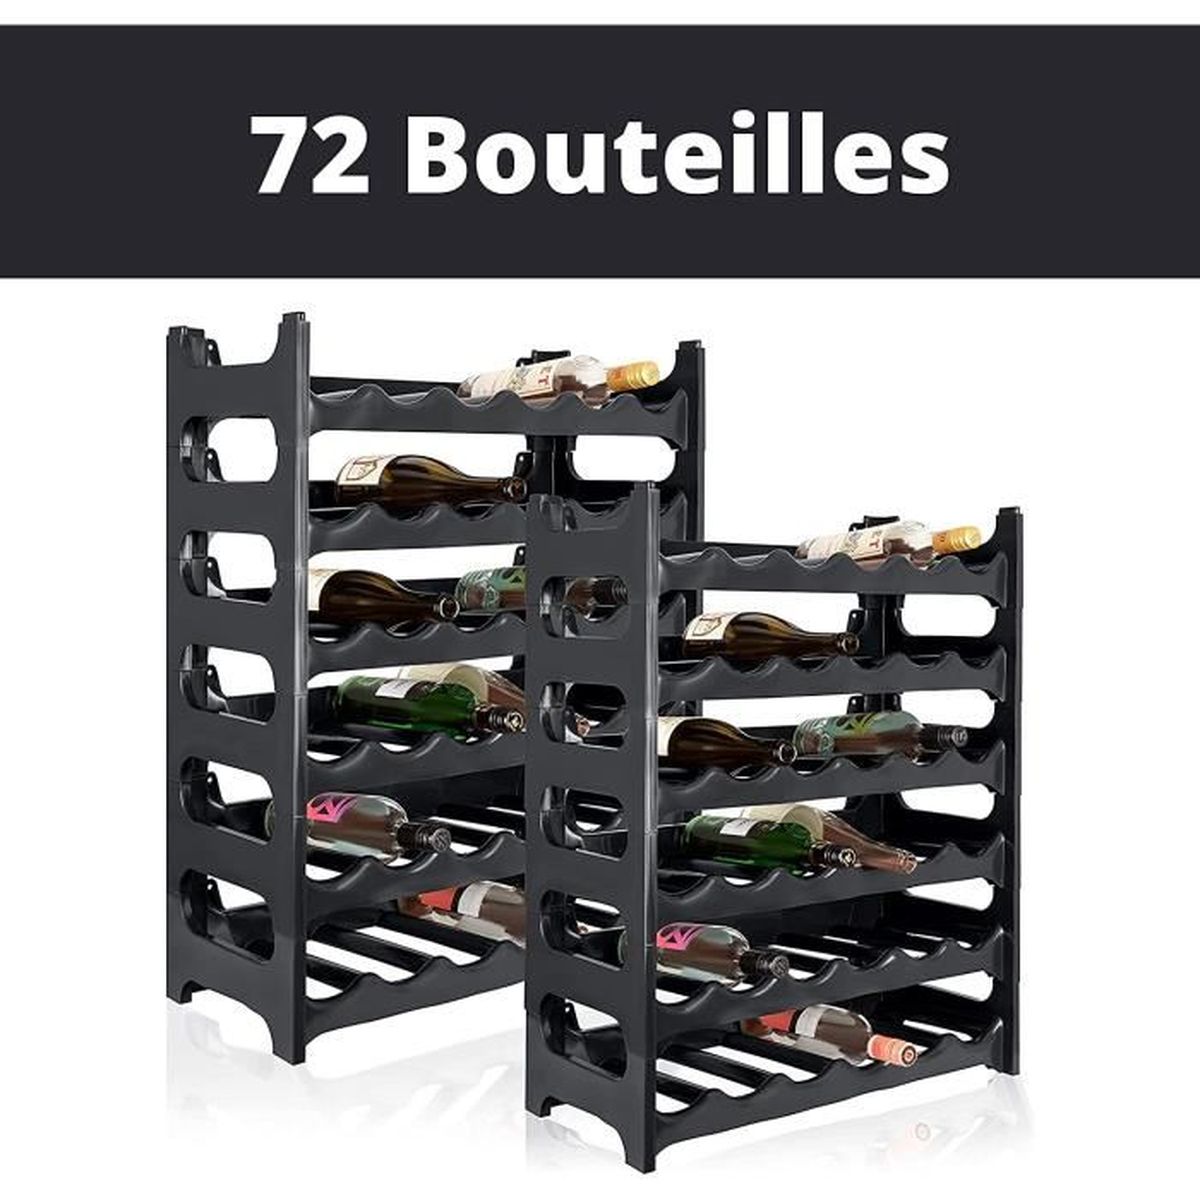 Porte Bouteille pour Cave - Vinovya - 100% Made in France